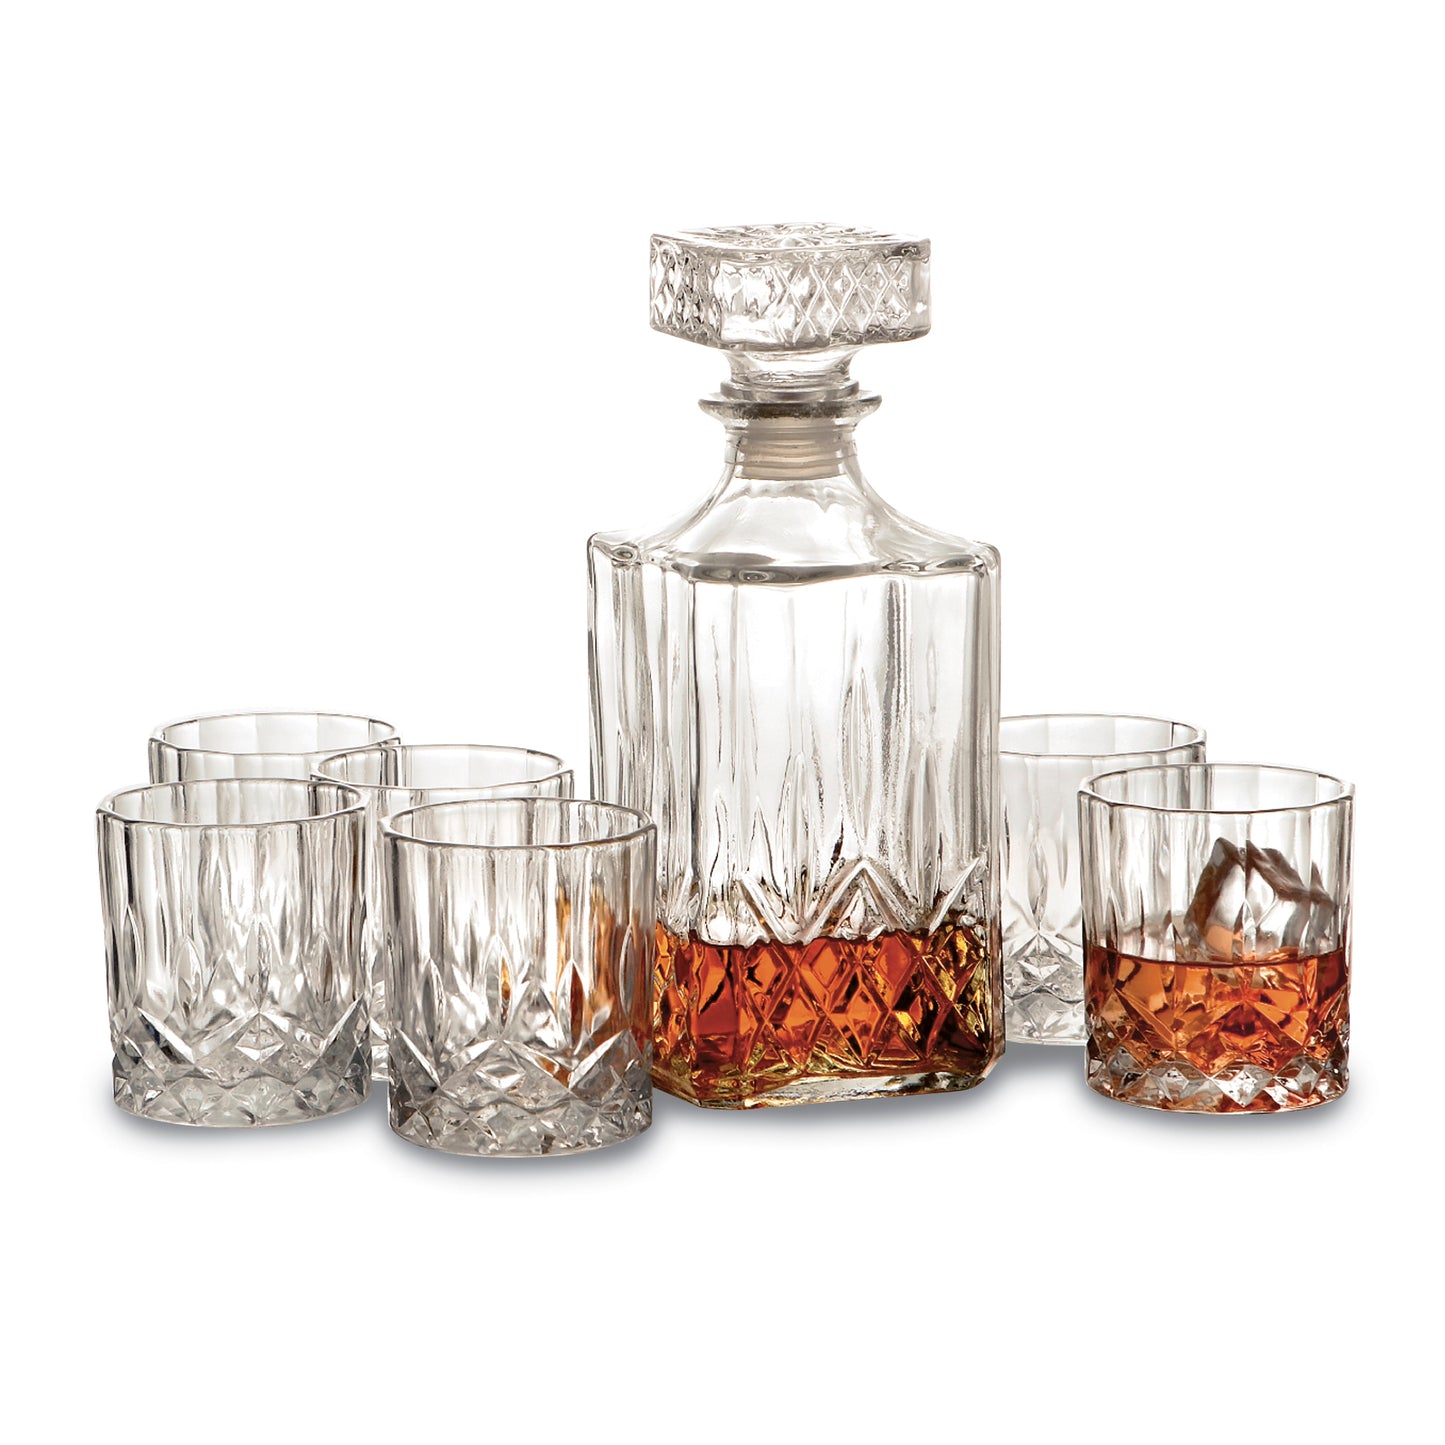 7 Piece Crystal Whiskey Set, 6-8 Oz Glasses And 1-32 Oz Decanter | Gifts